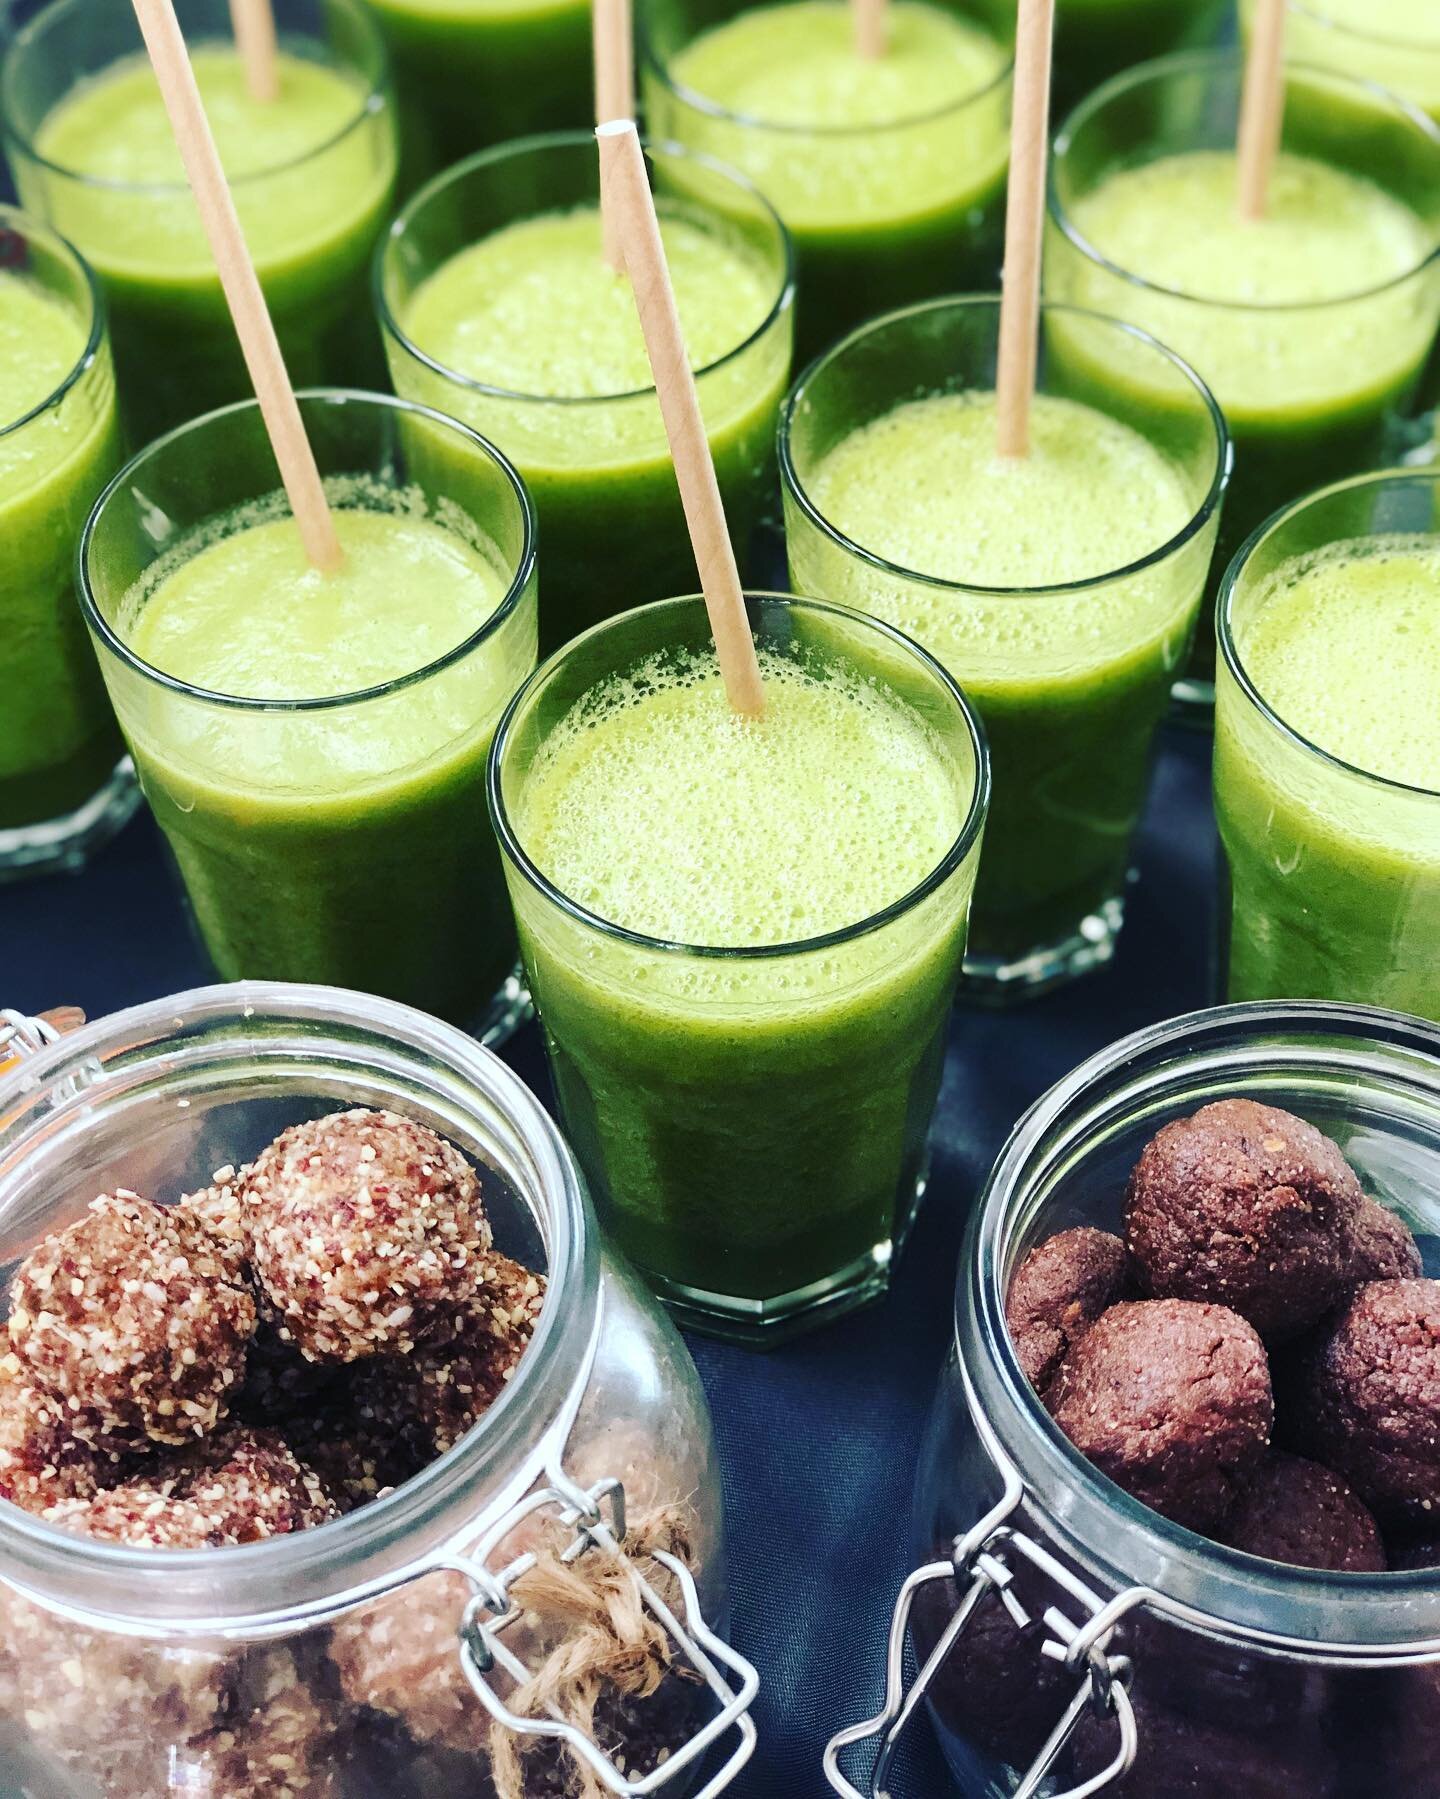 Mandate breath work
Mandate nutrition
Mandate nature
Mandate movement
Mandate sunlight
Mandate healing
Mandate connection
Mandate life
~ Maiwenn 
-
Can&rsquo;t wait to see you all soon! 
Until then here&rsquo;s our celery juice recipe to help cleanse